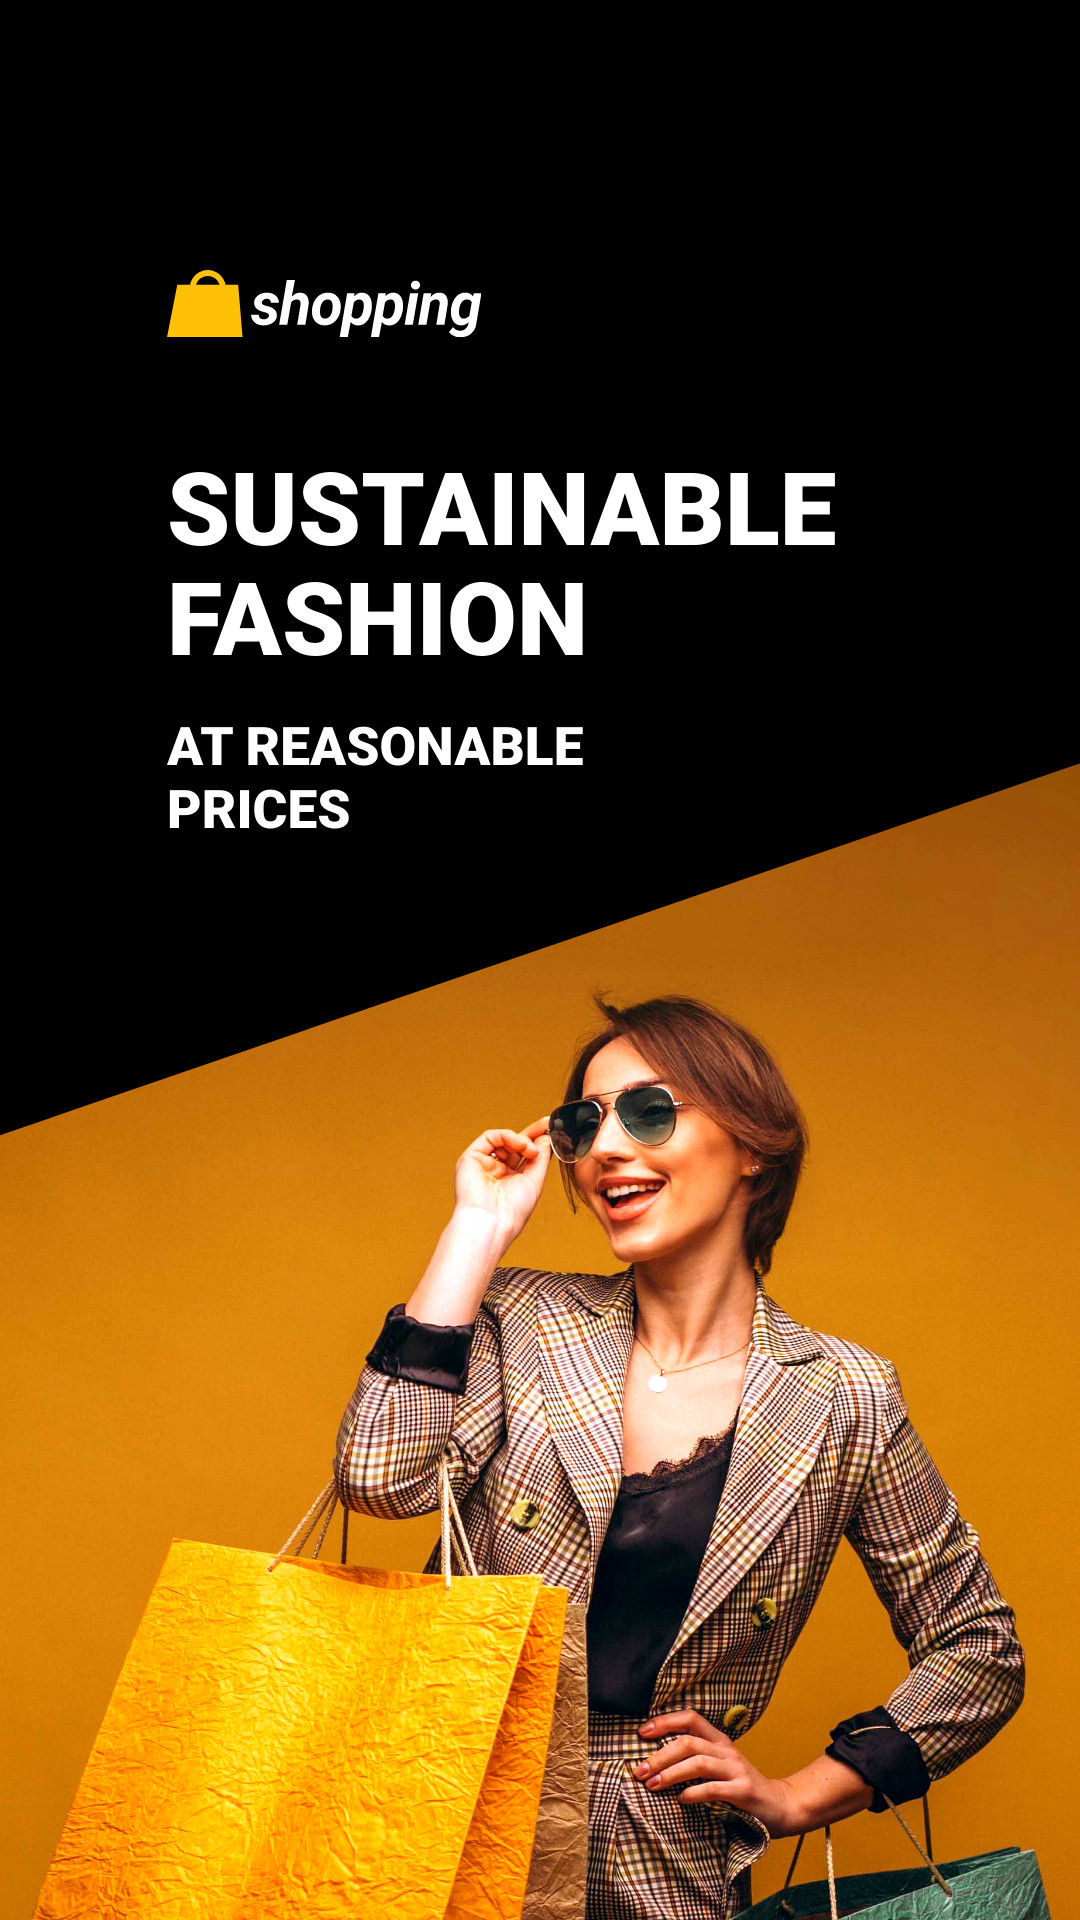 Earth Day Sustainable Fashion